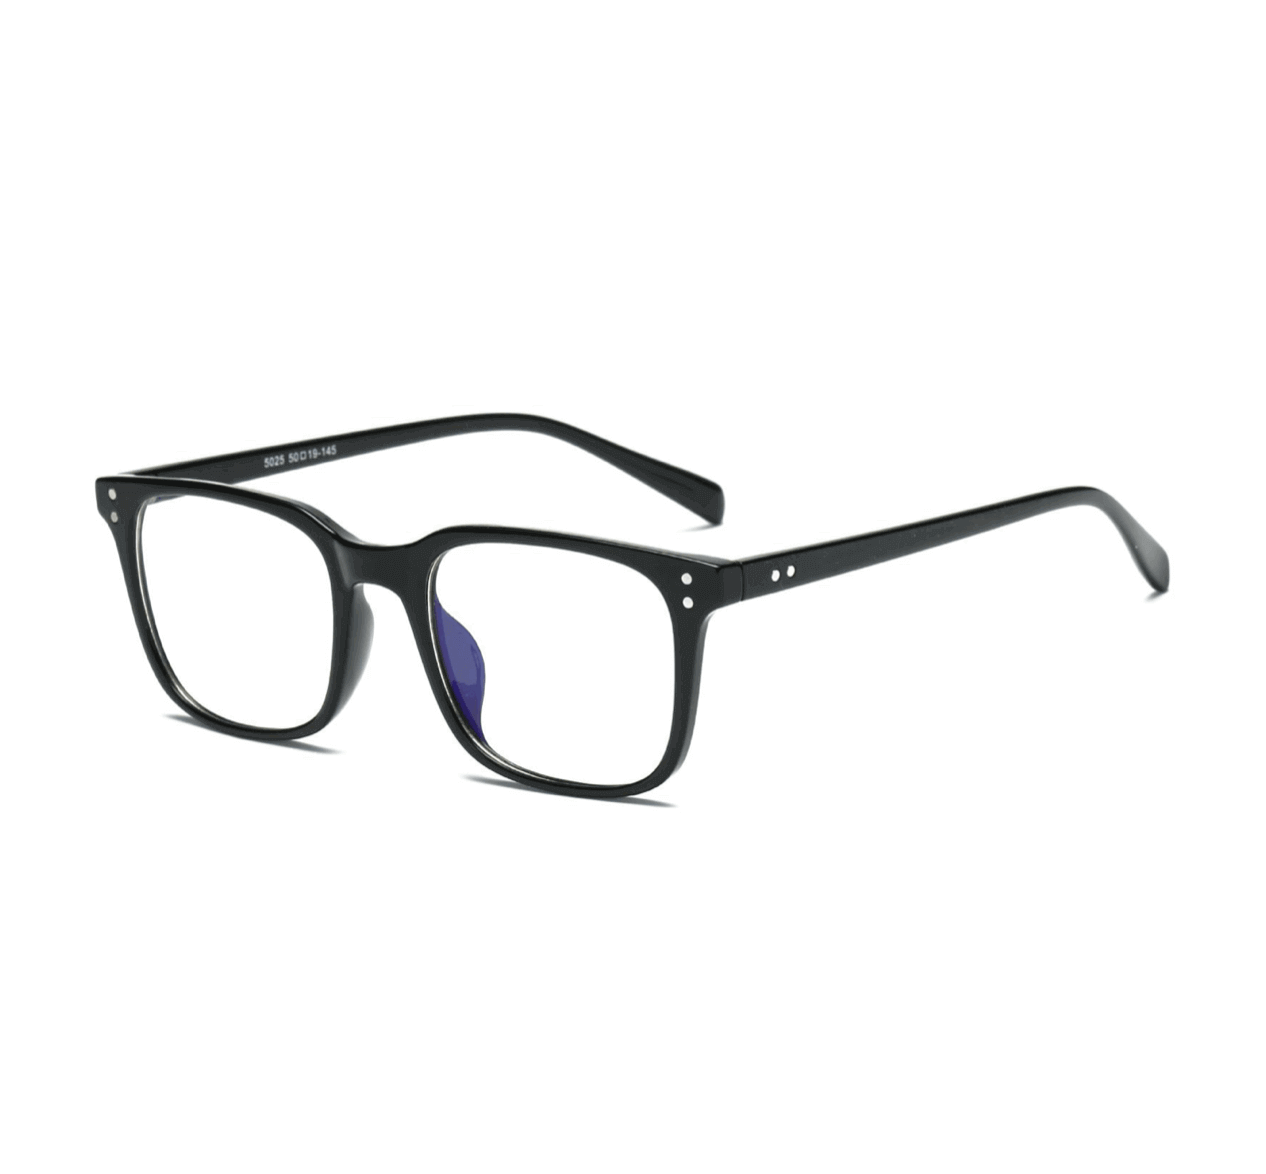 Wholesale Blue Light Glasses Manufacturer and Supplier in China